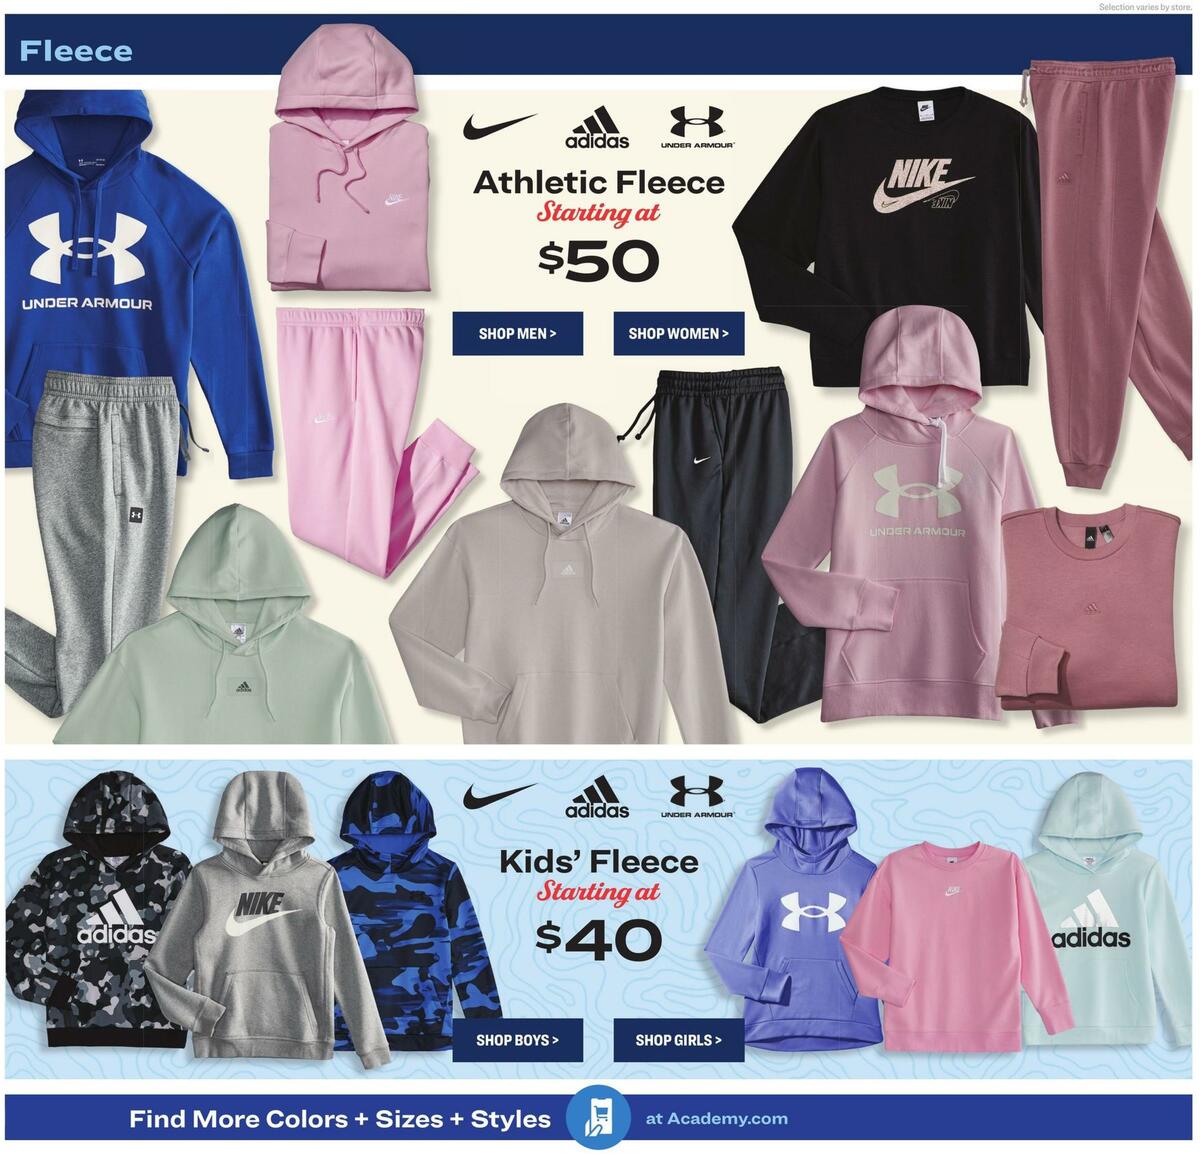 Academy Sports + Outdoors Weekly Ad from September 12